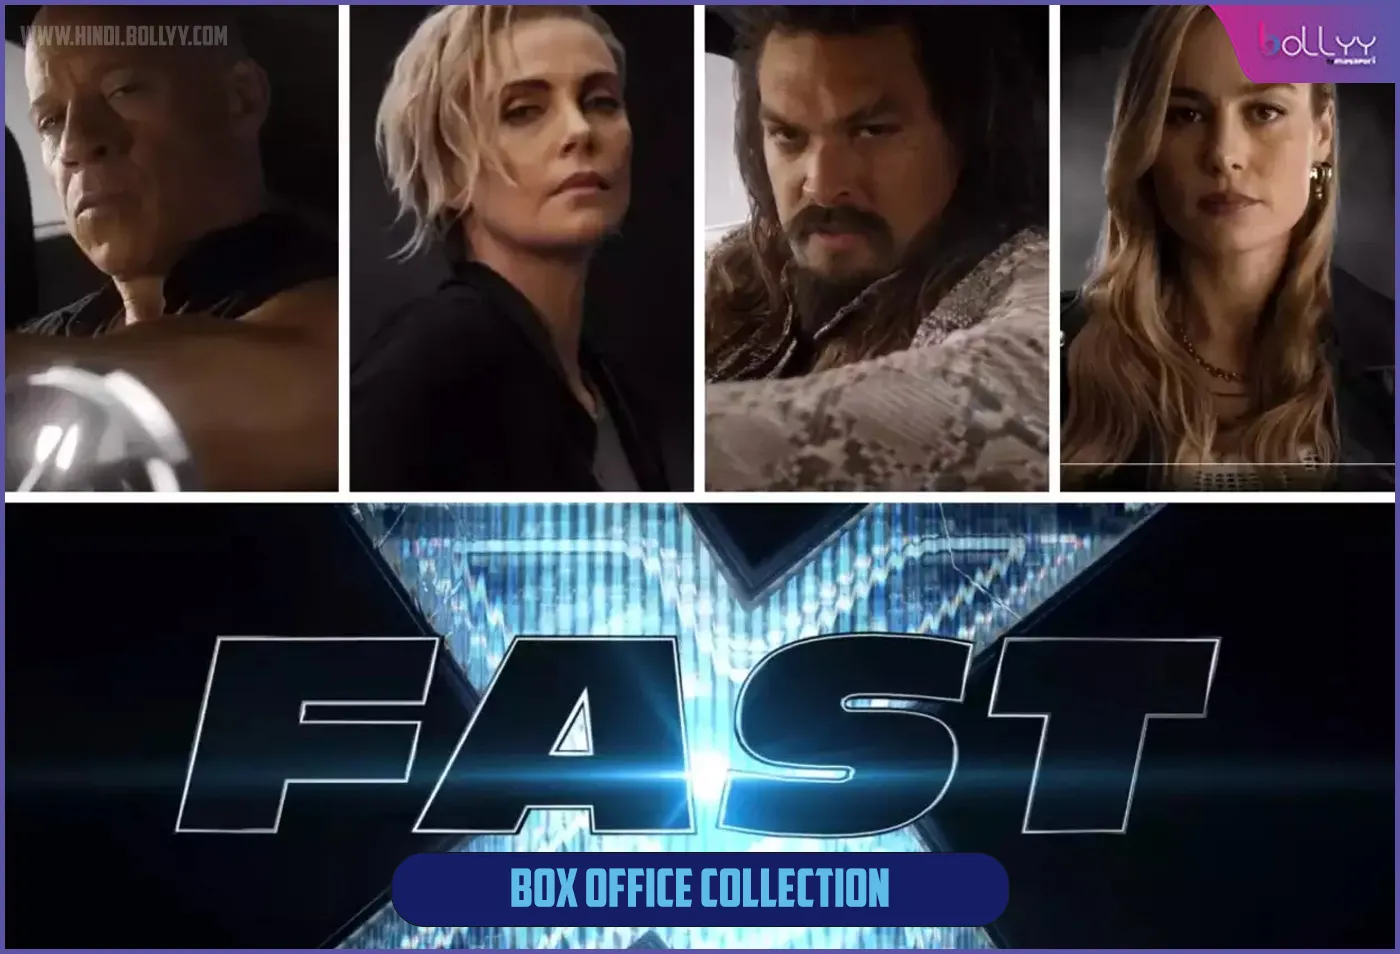 FAXT X BOX OFFICE COLLECTION